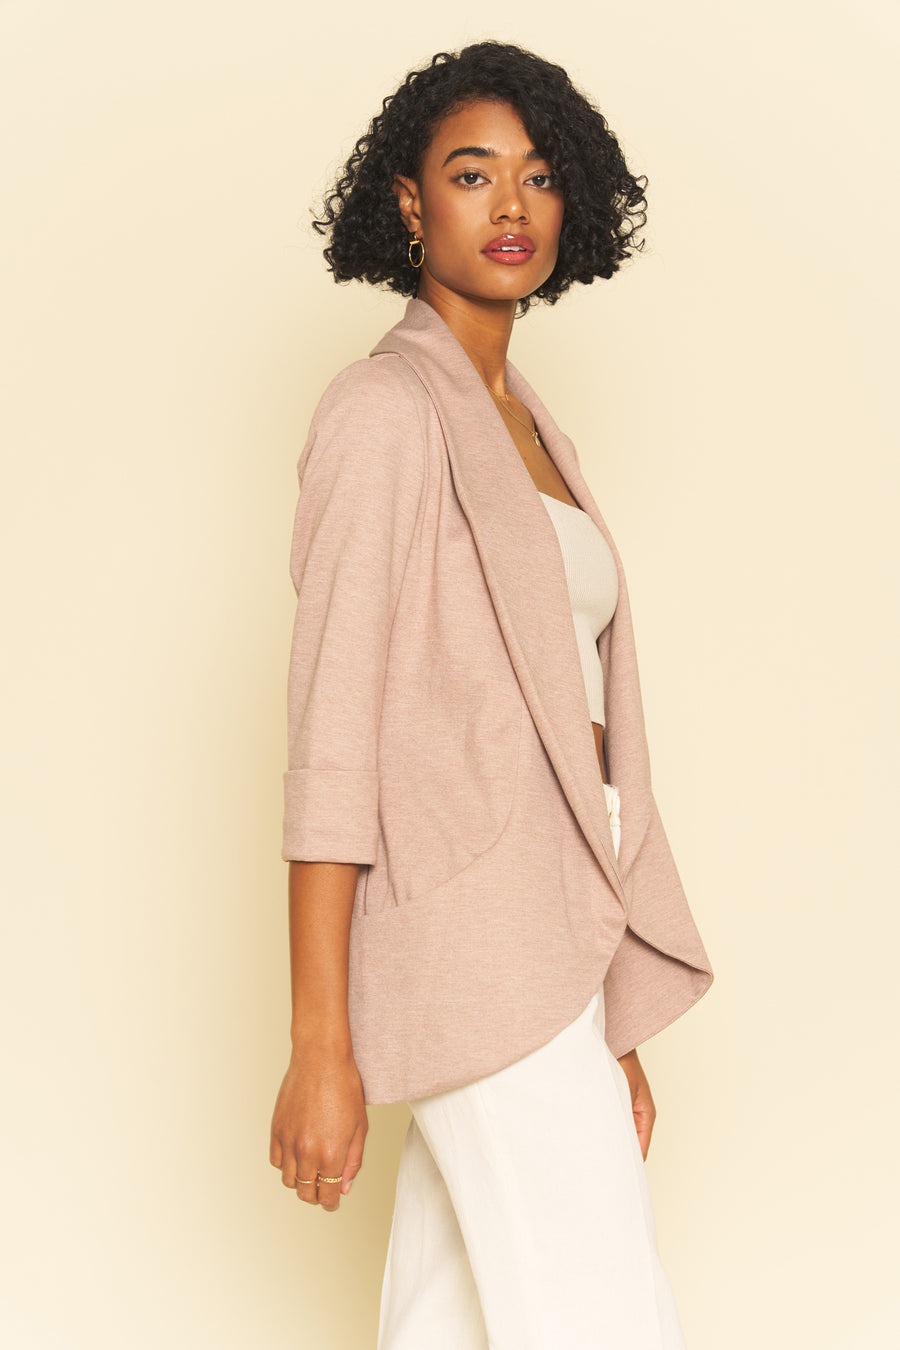 No Srcipt image - Images of 3 of 5 Classic Melanie Shawl Simple Staple Pink Beige Neutral Color Workwear Office Wear Women’s Outerwear Blazer Jacket Everyday Shawl Front Pockets Best Seller Customer Favorite Casual Style Everyday Jacket